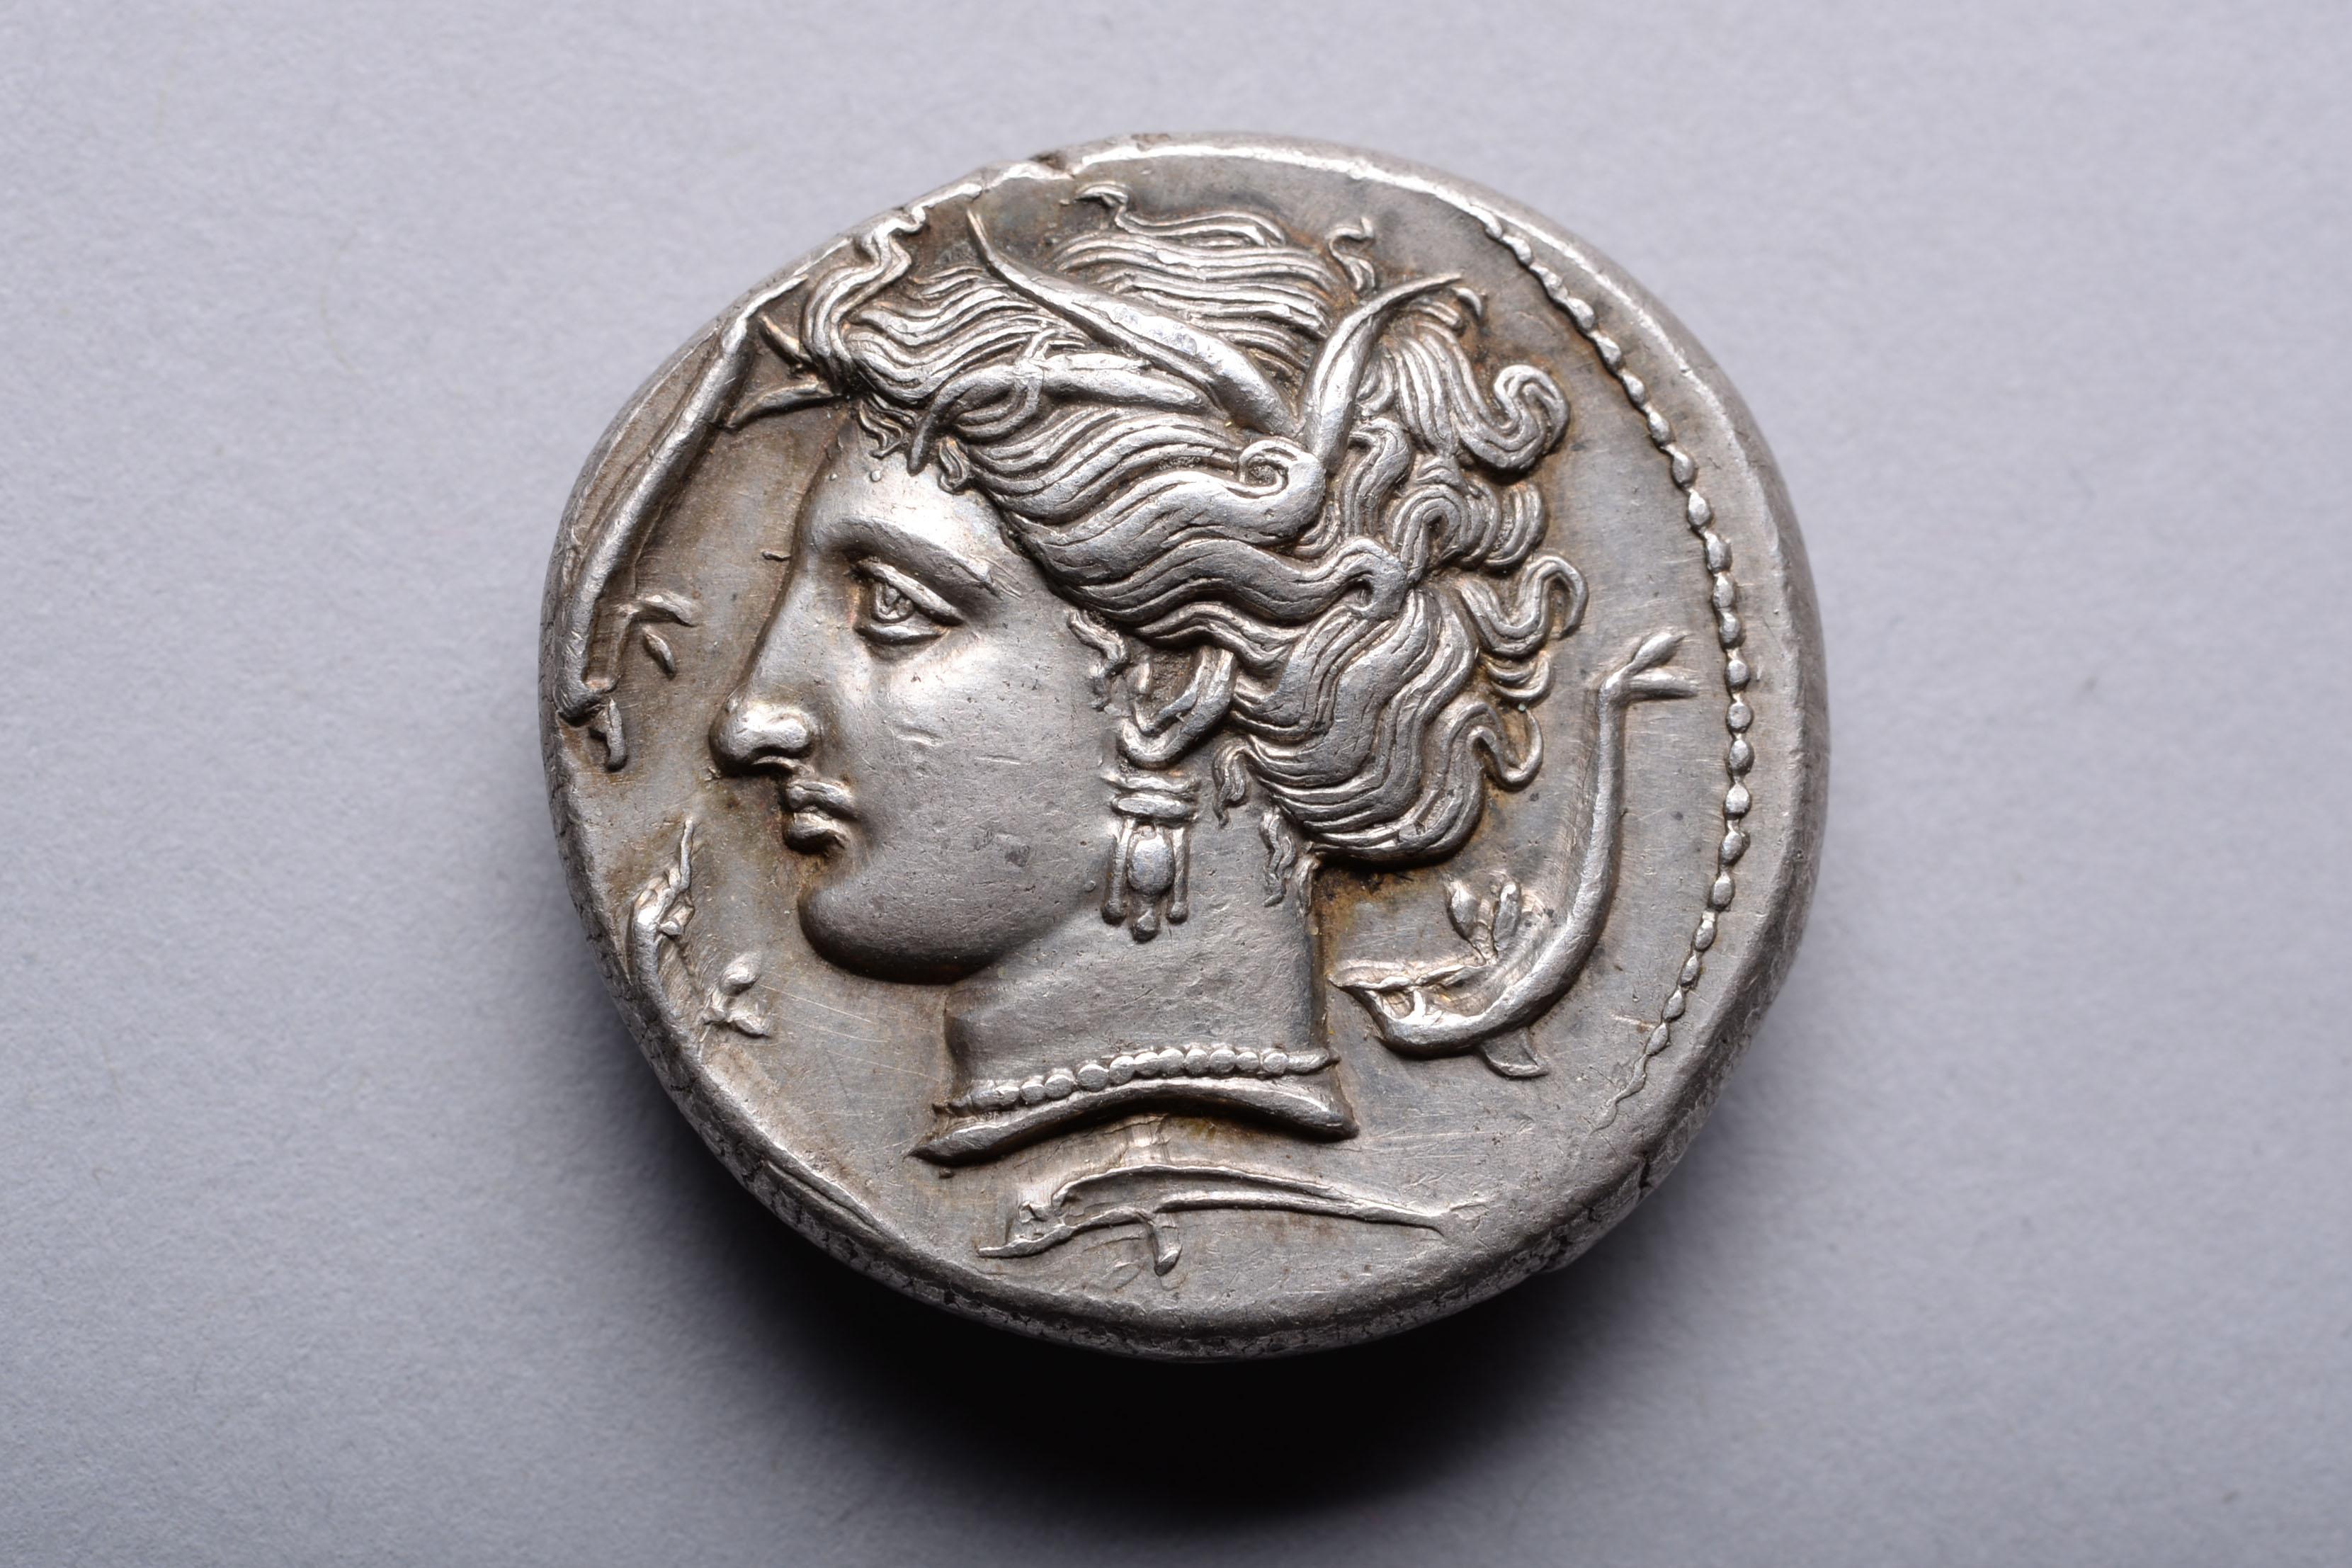 This beautiful coin was issued at the Entella mint, Sicily, by the Carthaginians. The obverse with a portrait of the nymph and patron of Syracuse, Arethusa. The reverse with a date palm and the head of a horse, the national emblem of Carthage.